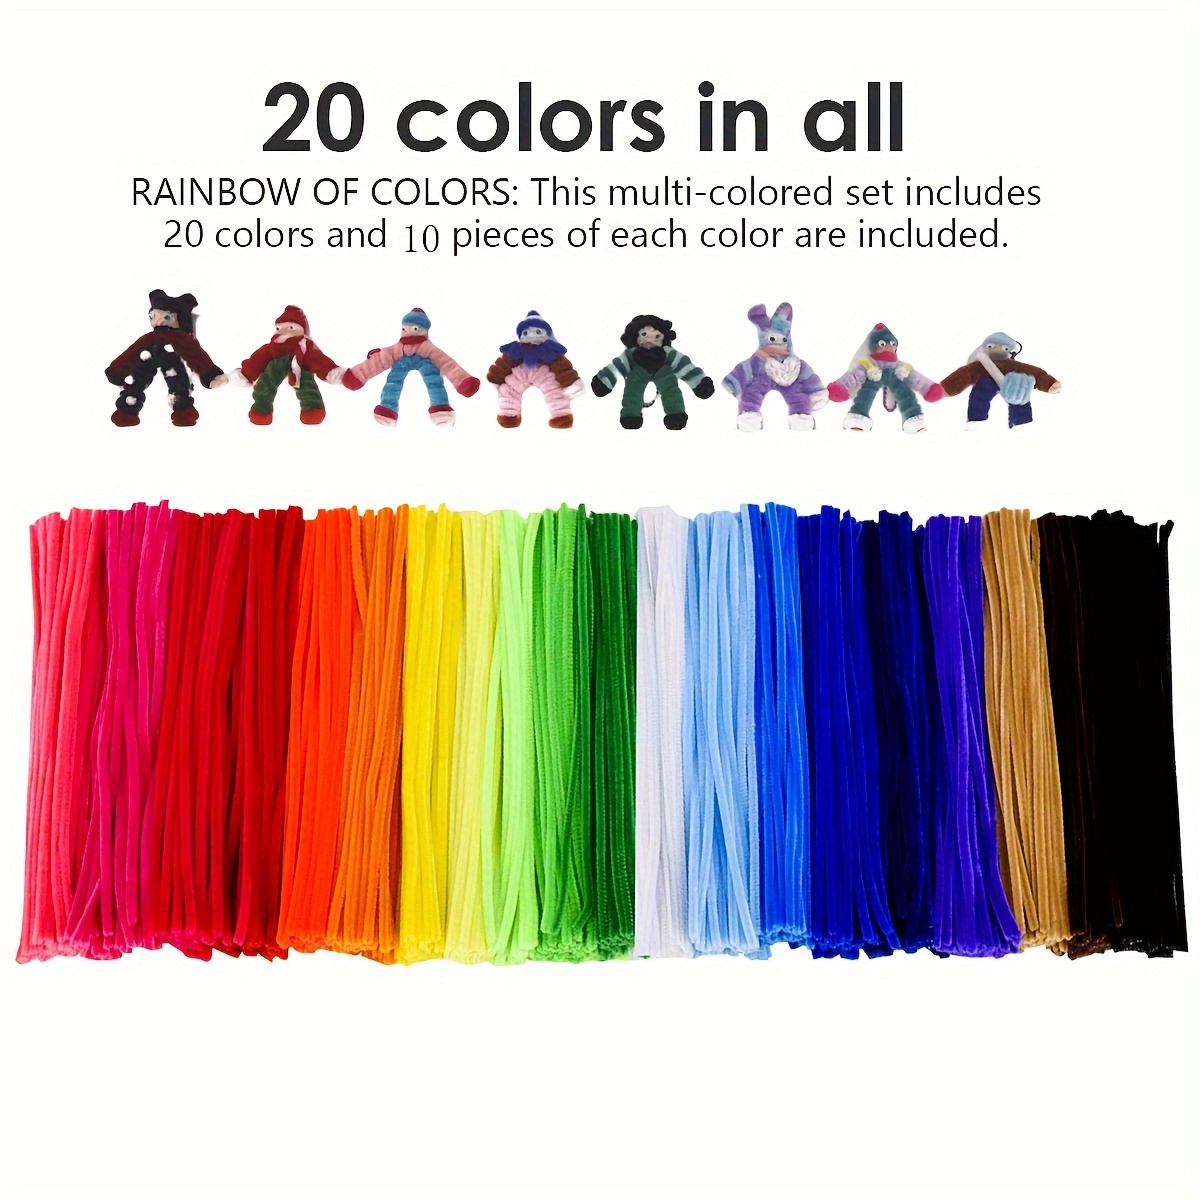 Colorations Pipe Cleaners - Set of All 10